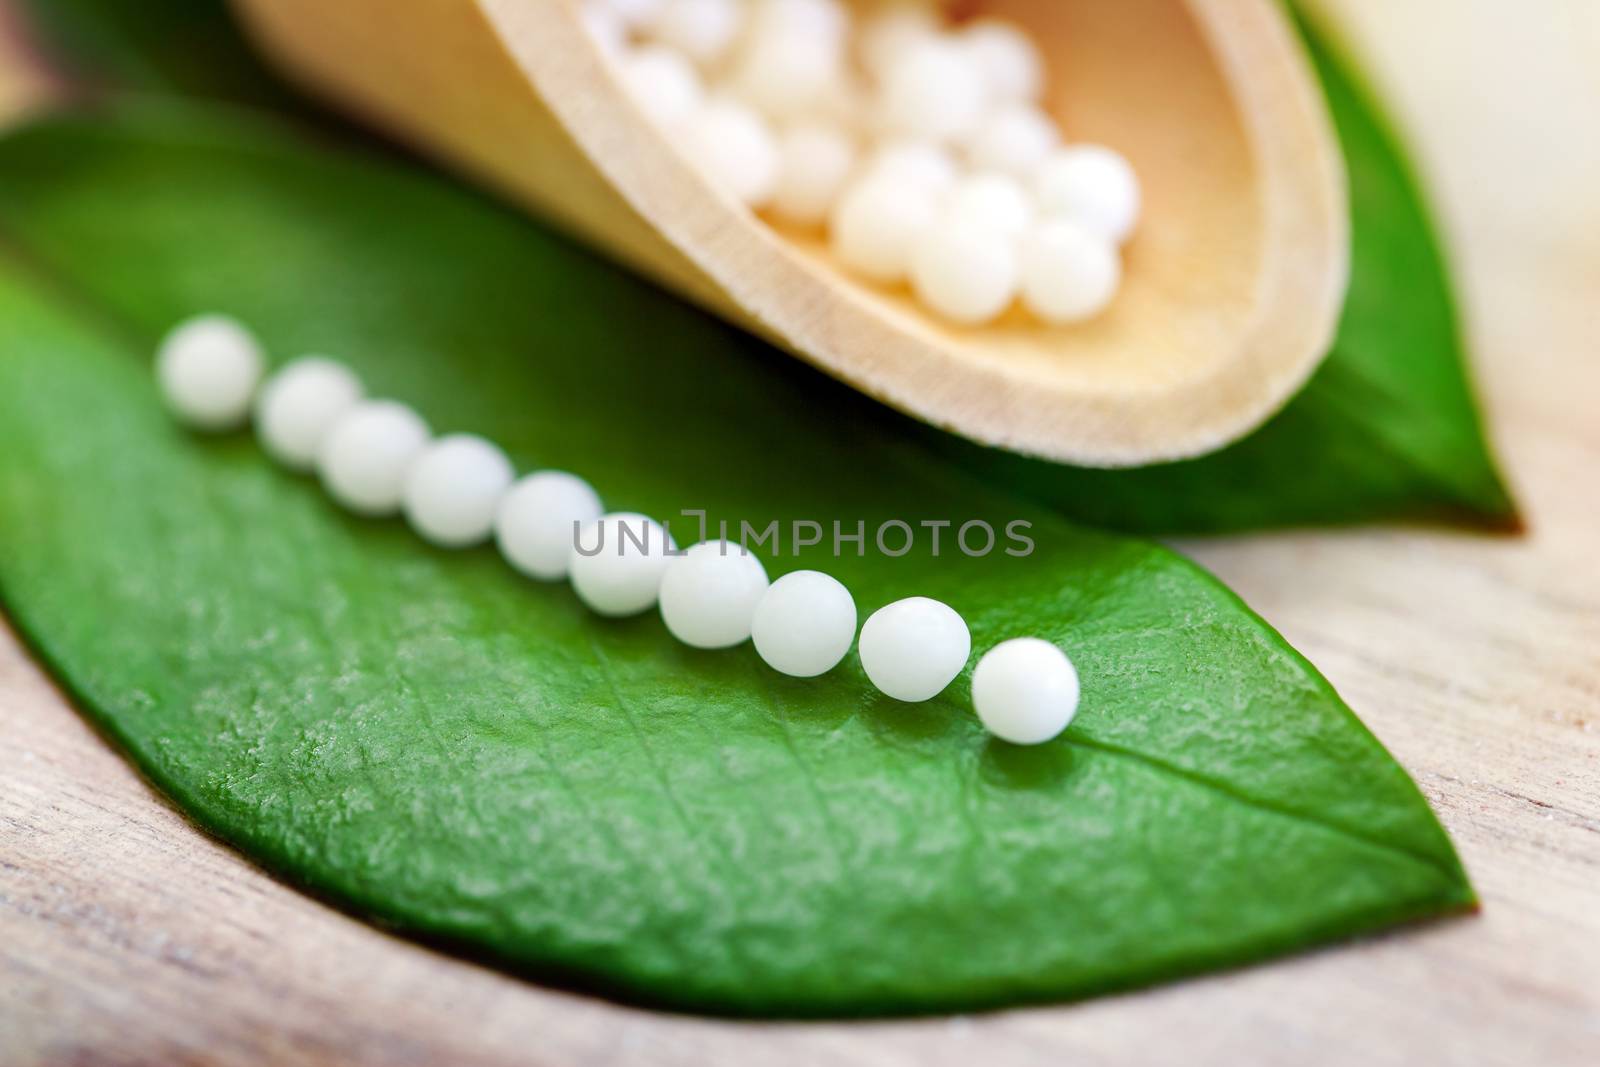 Homeopathic pills on leaf. by karelnoppe